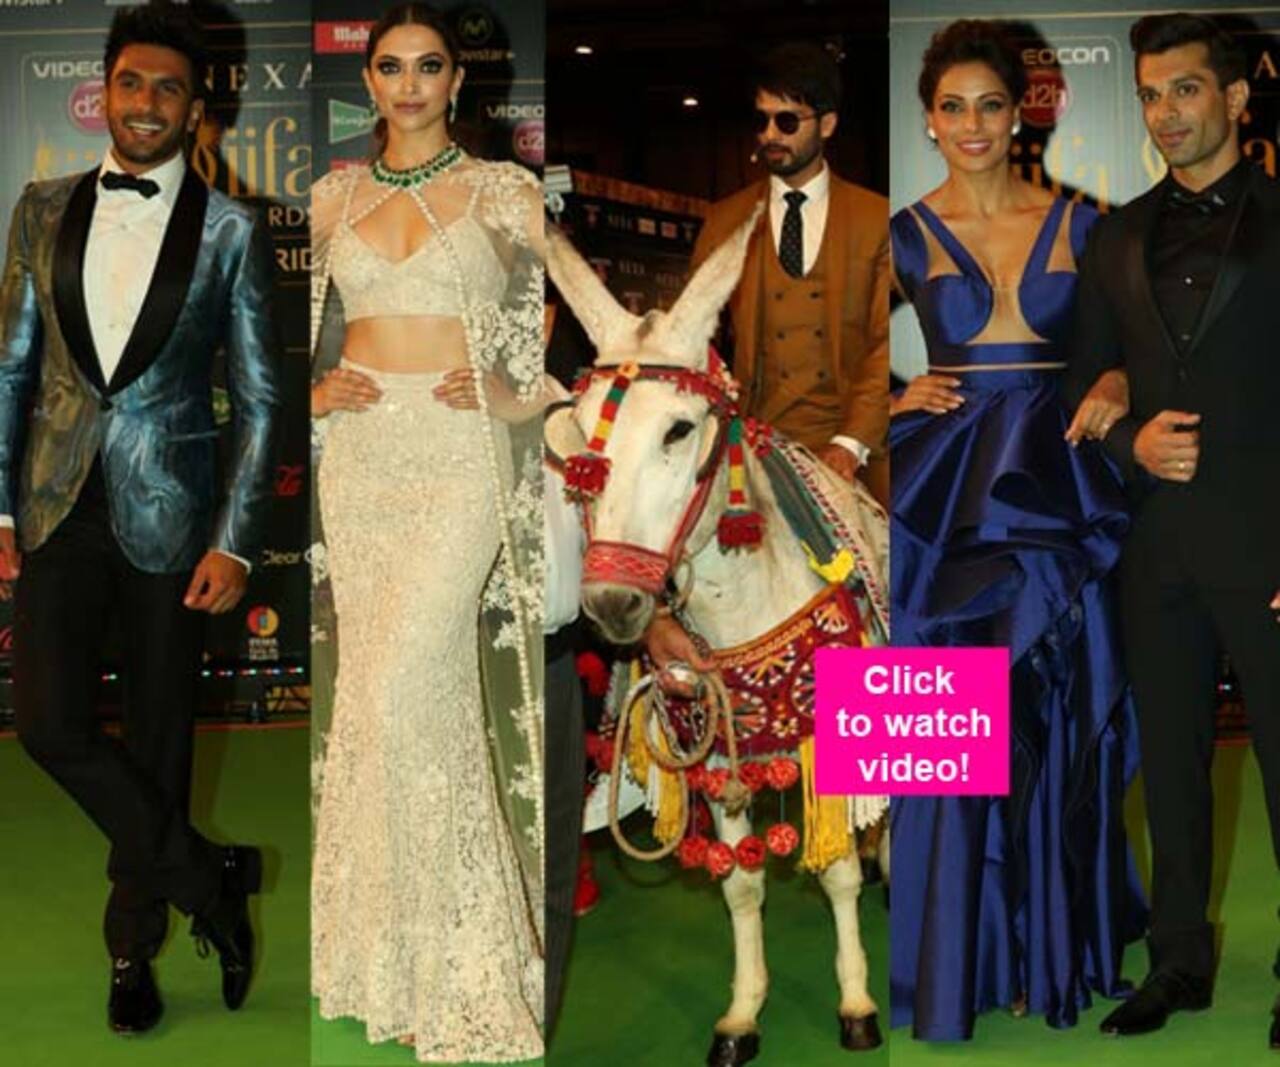 IIFA 2016 best videos: From Shahid Kapoor-Farhan Akhtar's entry on mules to Ranveer Singh-Sonakshi Sinha's photobomb war - check out the 9 best clips from the event!